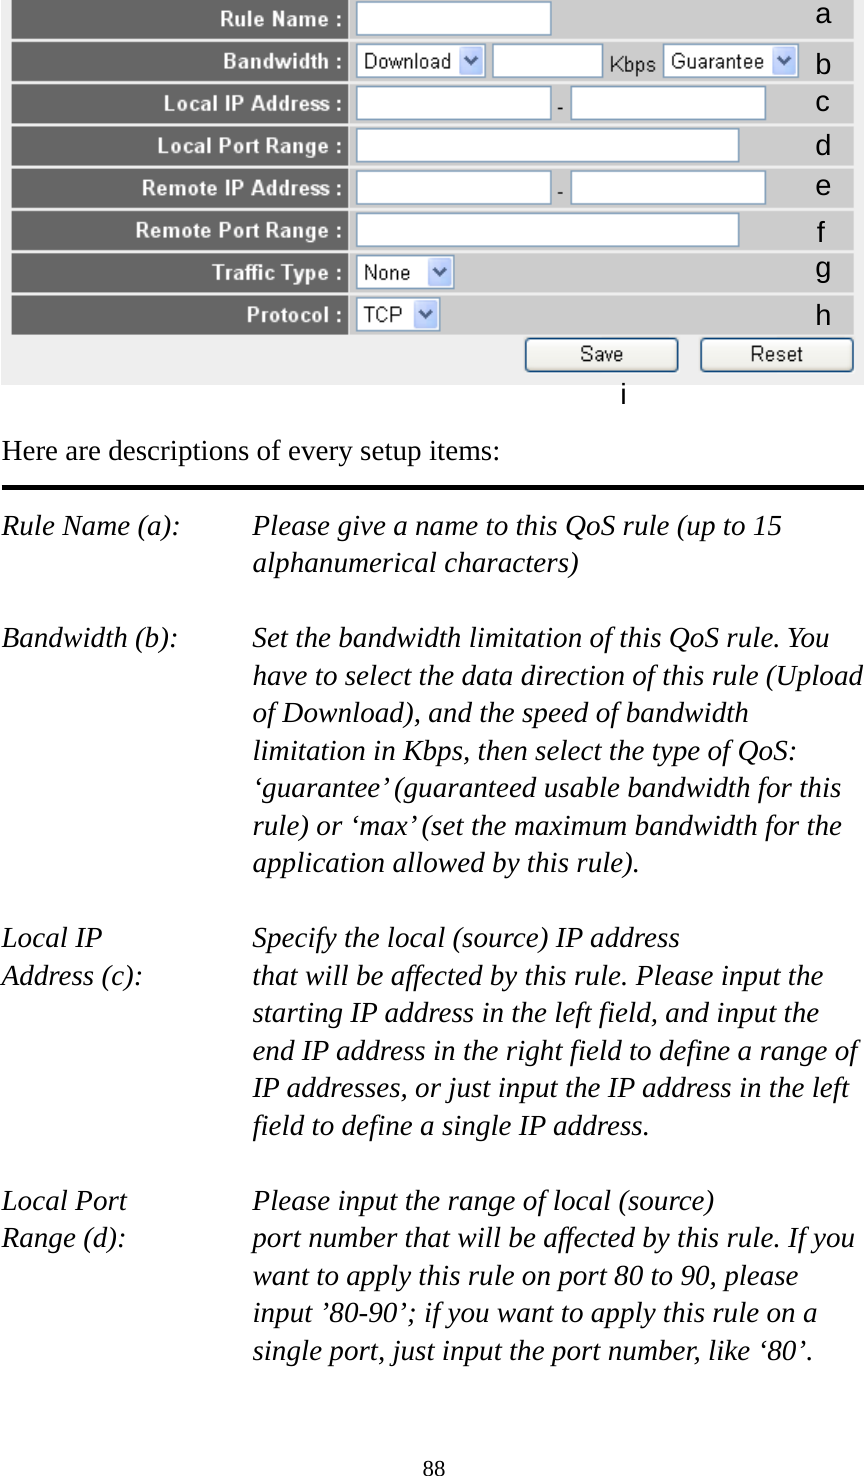 88   Here are descriptions of every setup items:  Rule Name (a):    Please give a name to this QoS rule (up to 15 alphanumerical characters)  Bandwidth (b):    Set the bandwidth limitation of this QoS rule. You have to select the data direction of this rule (Upload of Download), and the speed of bandwidth limitation in Kbps, then select the type of QoS: ‘guarantee’ (guaranteed usable bandwidth for this rule) or ‘max’ (set the maximum bandwidth for the application allowed by this rule).  Local IP        Specify the local (source) IP address Address (c):     that will be affected by this rule. Please input the starting IP address in the left field, and input the end IP address in the right field to define a range of IP addresses, or just input the IP address in the left field to define a single IP address.  Local Port       Please input the range of local (source) Range (d):    port number that will be affected by this rule. If you want to apply this rule on port 80 to 90, please input ’80-90’; if you want to apply this rule on a single port, just input the port number, like ‘80’.  a b c d e f g h i